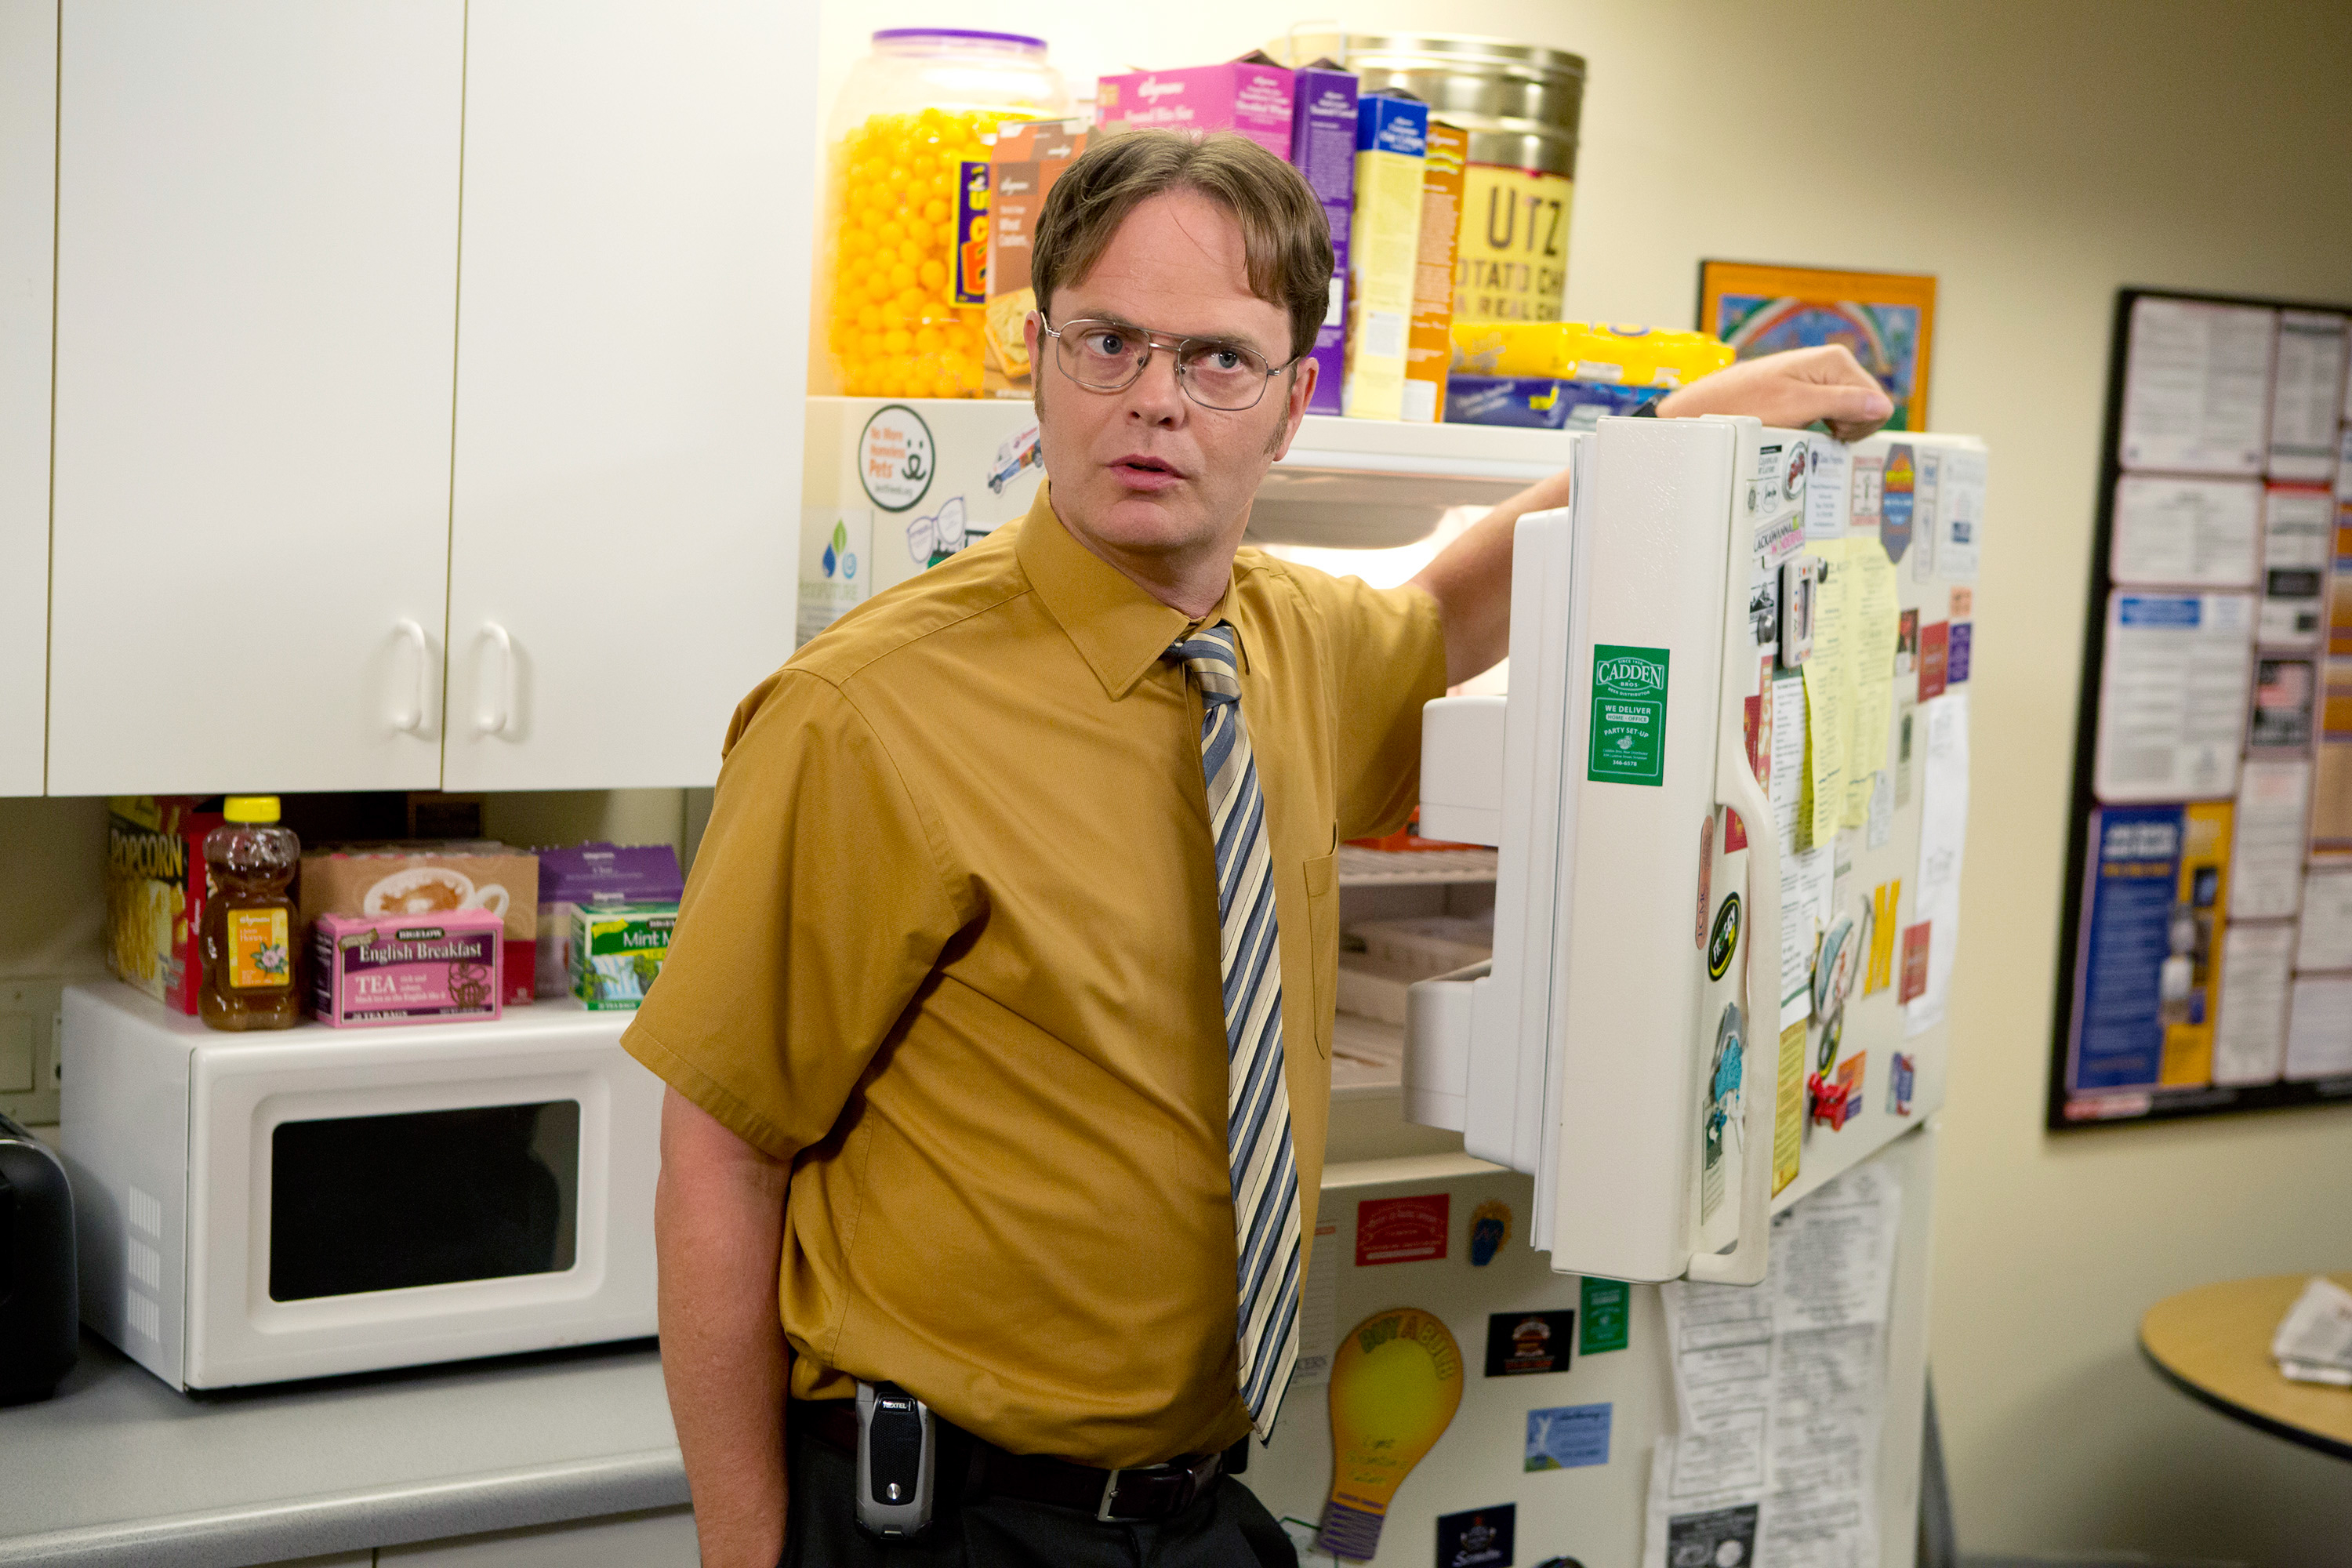 Actor in character as Dwight Schrute from TV show standing by an open fridge in an office kitchen